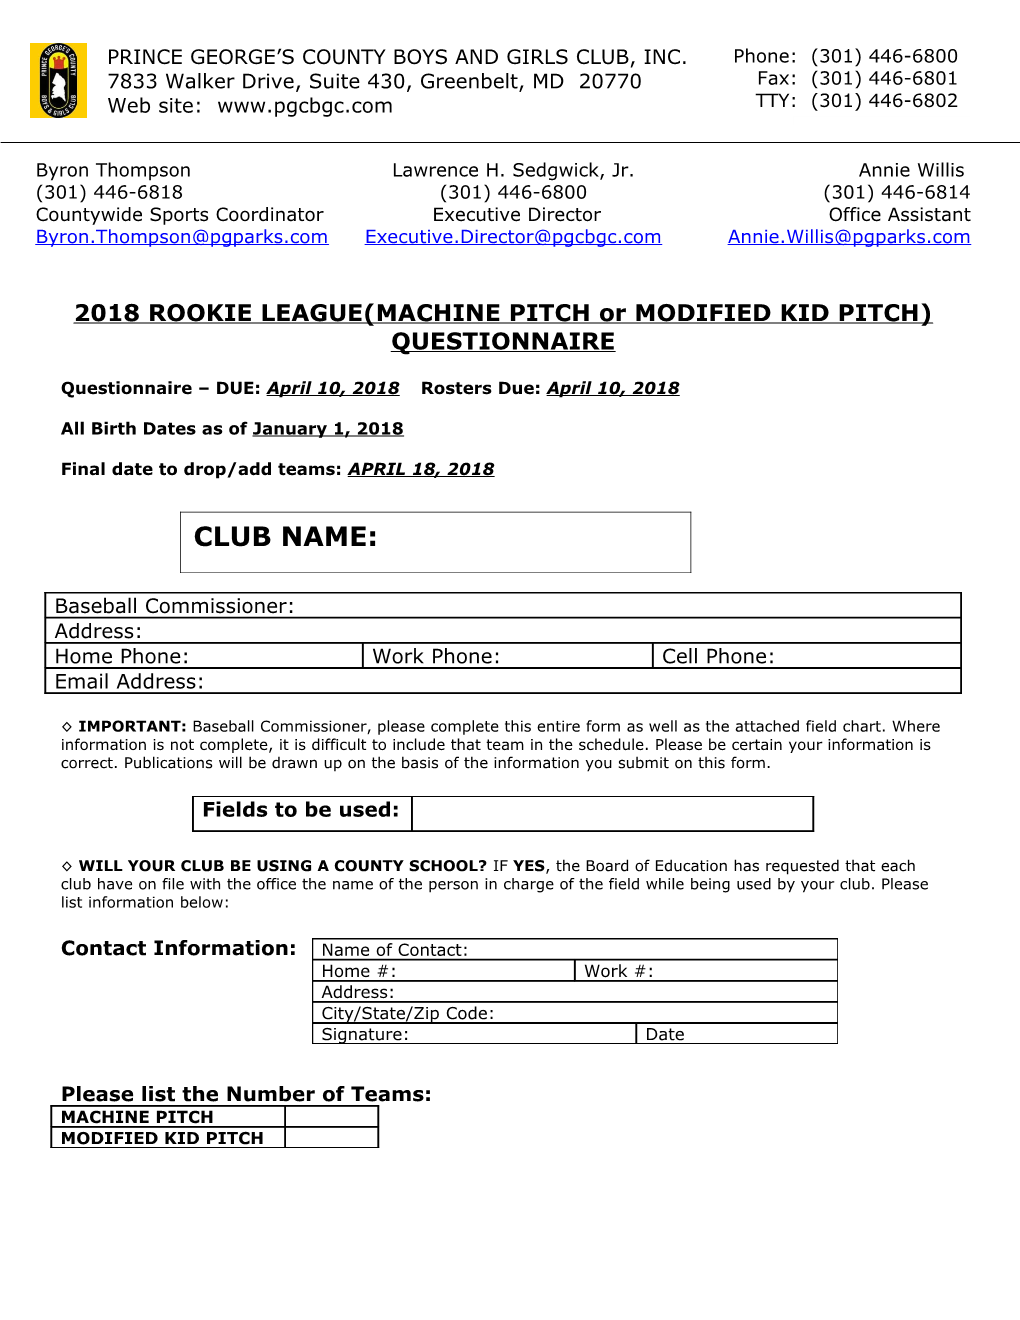 2018ROOKIE LEAGUE(MACHINE PITCH Or MODIFIED KID PITCH) QUESTIONNAIRE